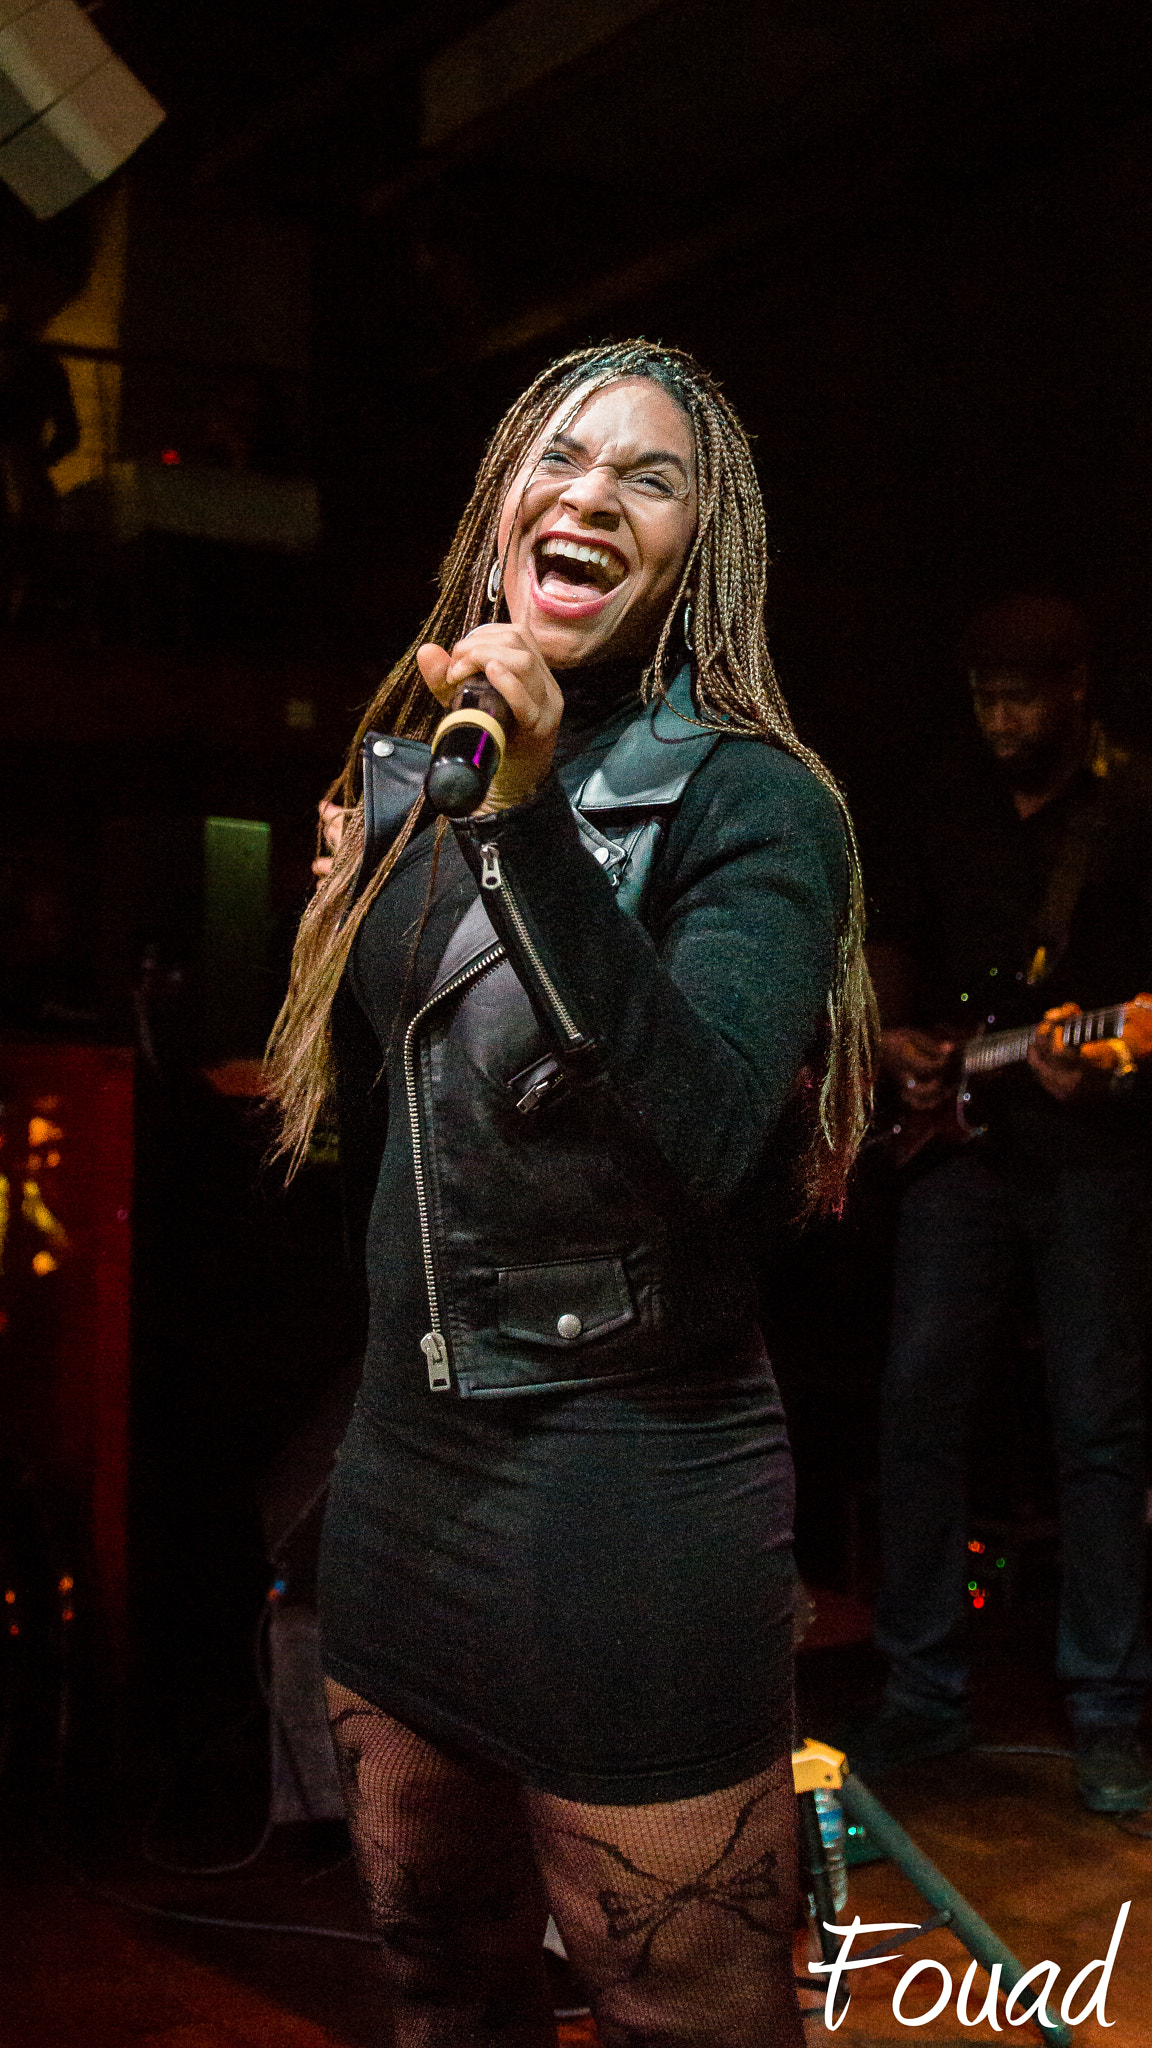 Sony SLT-A77 + Sigma 18-35mm F1.8 DC HSM Art sample photo. Teedra moses live in paris, 2016 photography